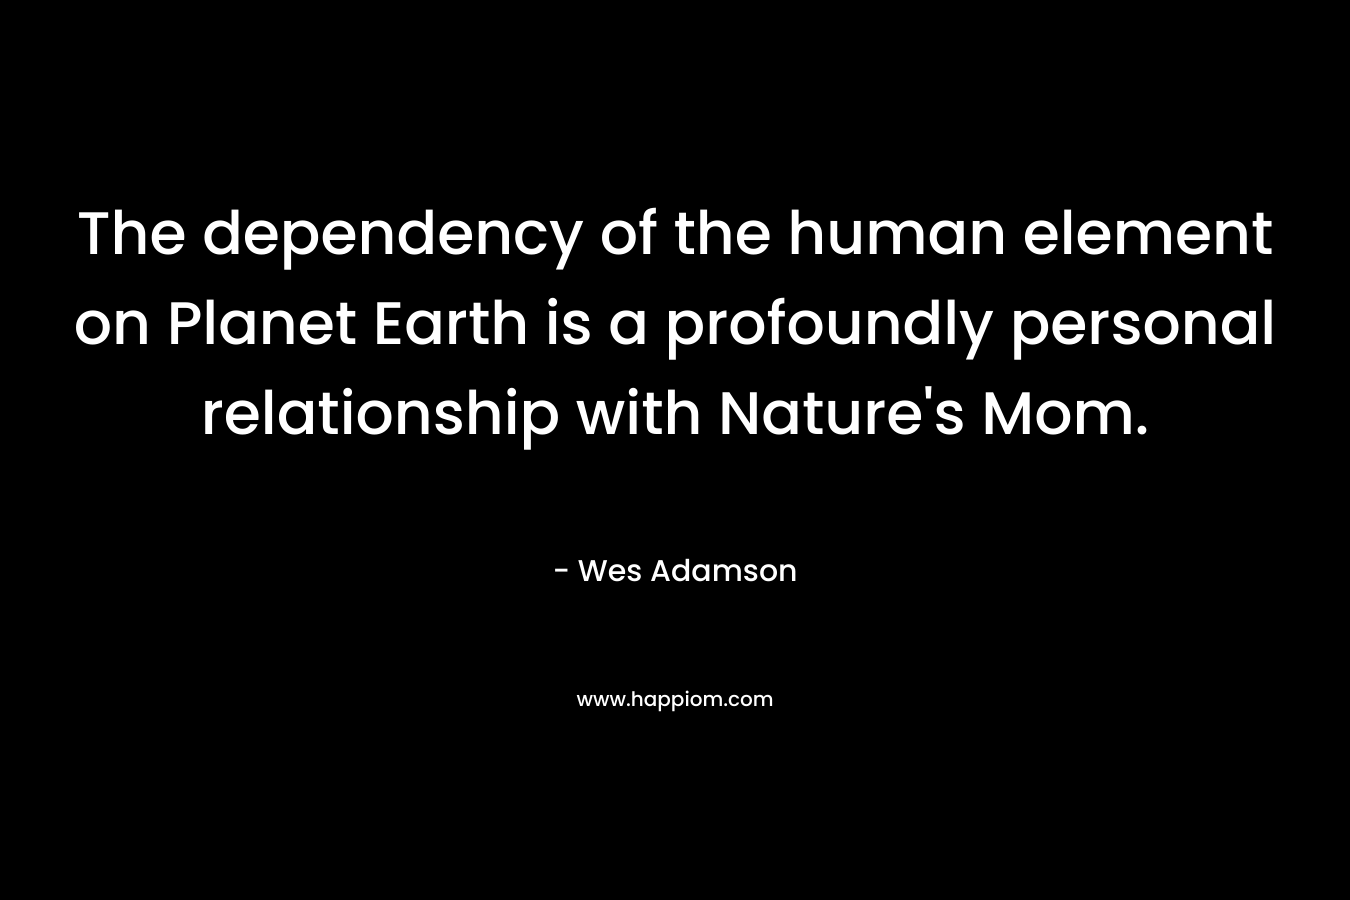 The dependency of the human element on Planet Earth is a profoundly personal relationship with Nature’s Mom. – Wes Adamson